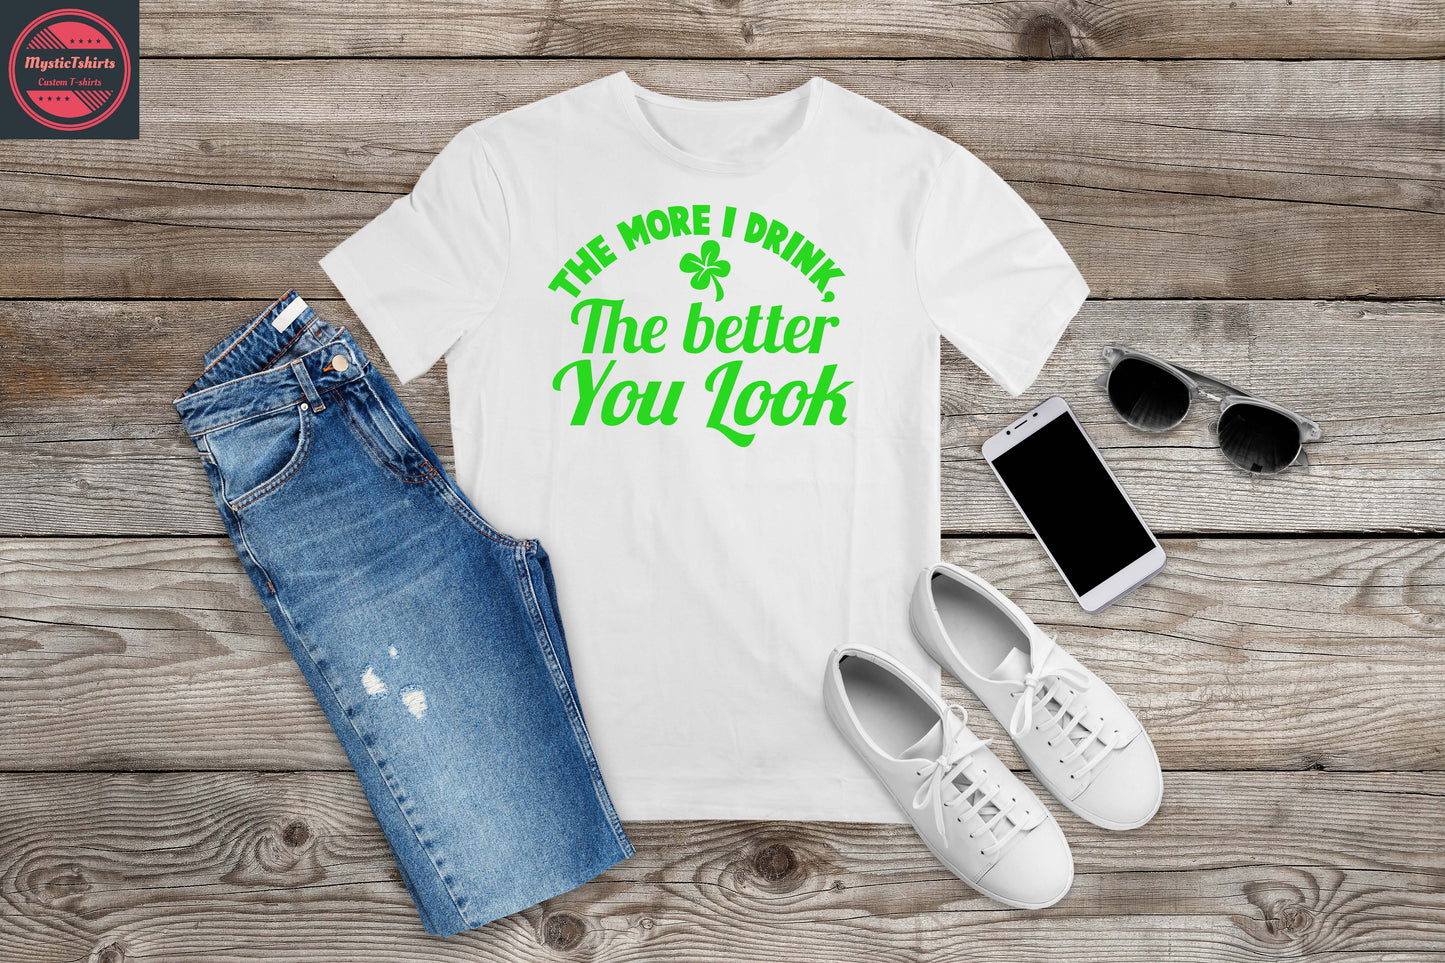 453. THE MORE I DRINK THE BETTER YOU LOOK, Custom Made Shirt, Personalized T-Shirt, Custom Text, Make Your Own Shirt, Custom Tee